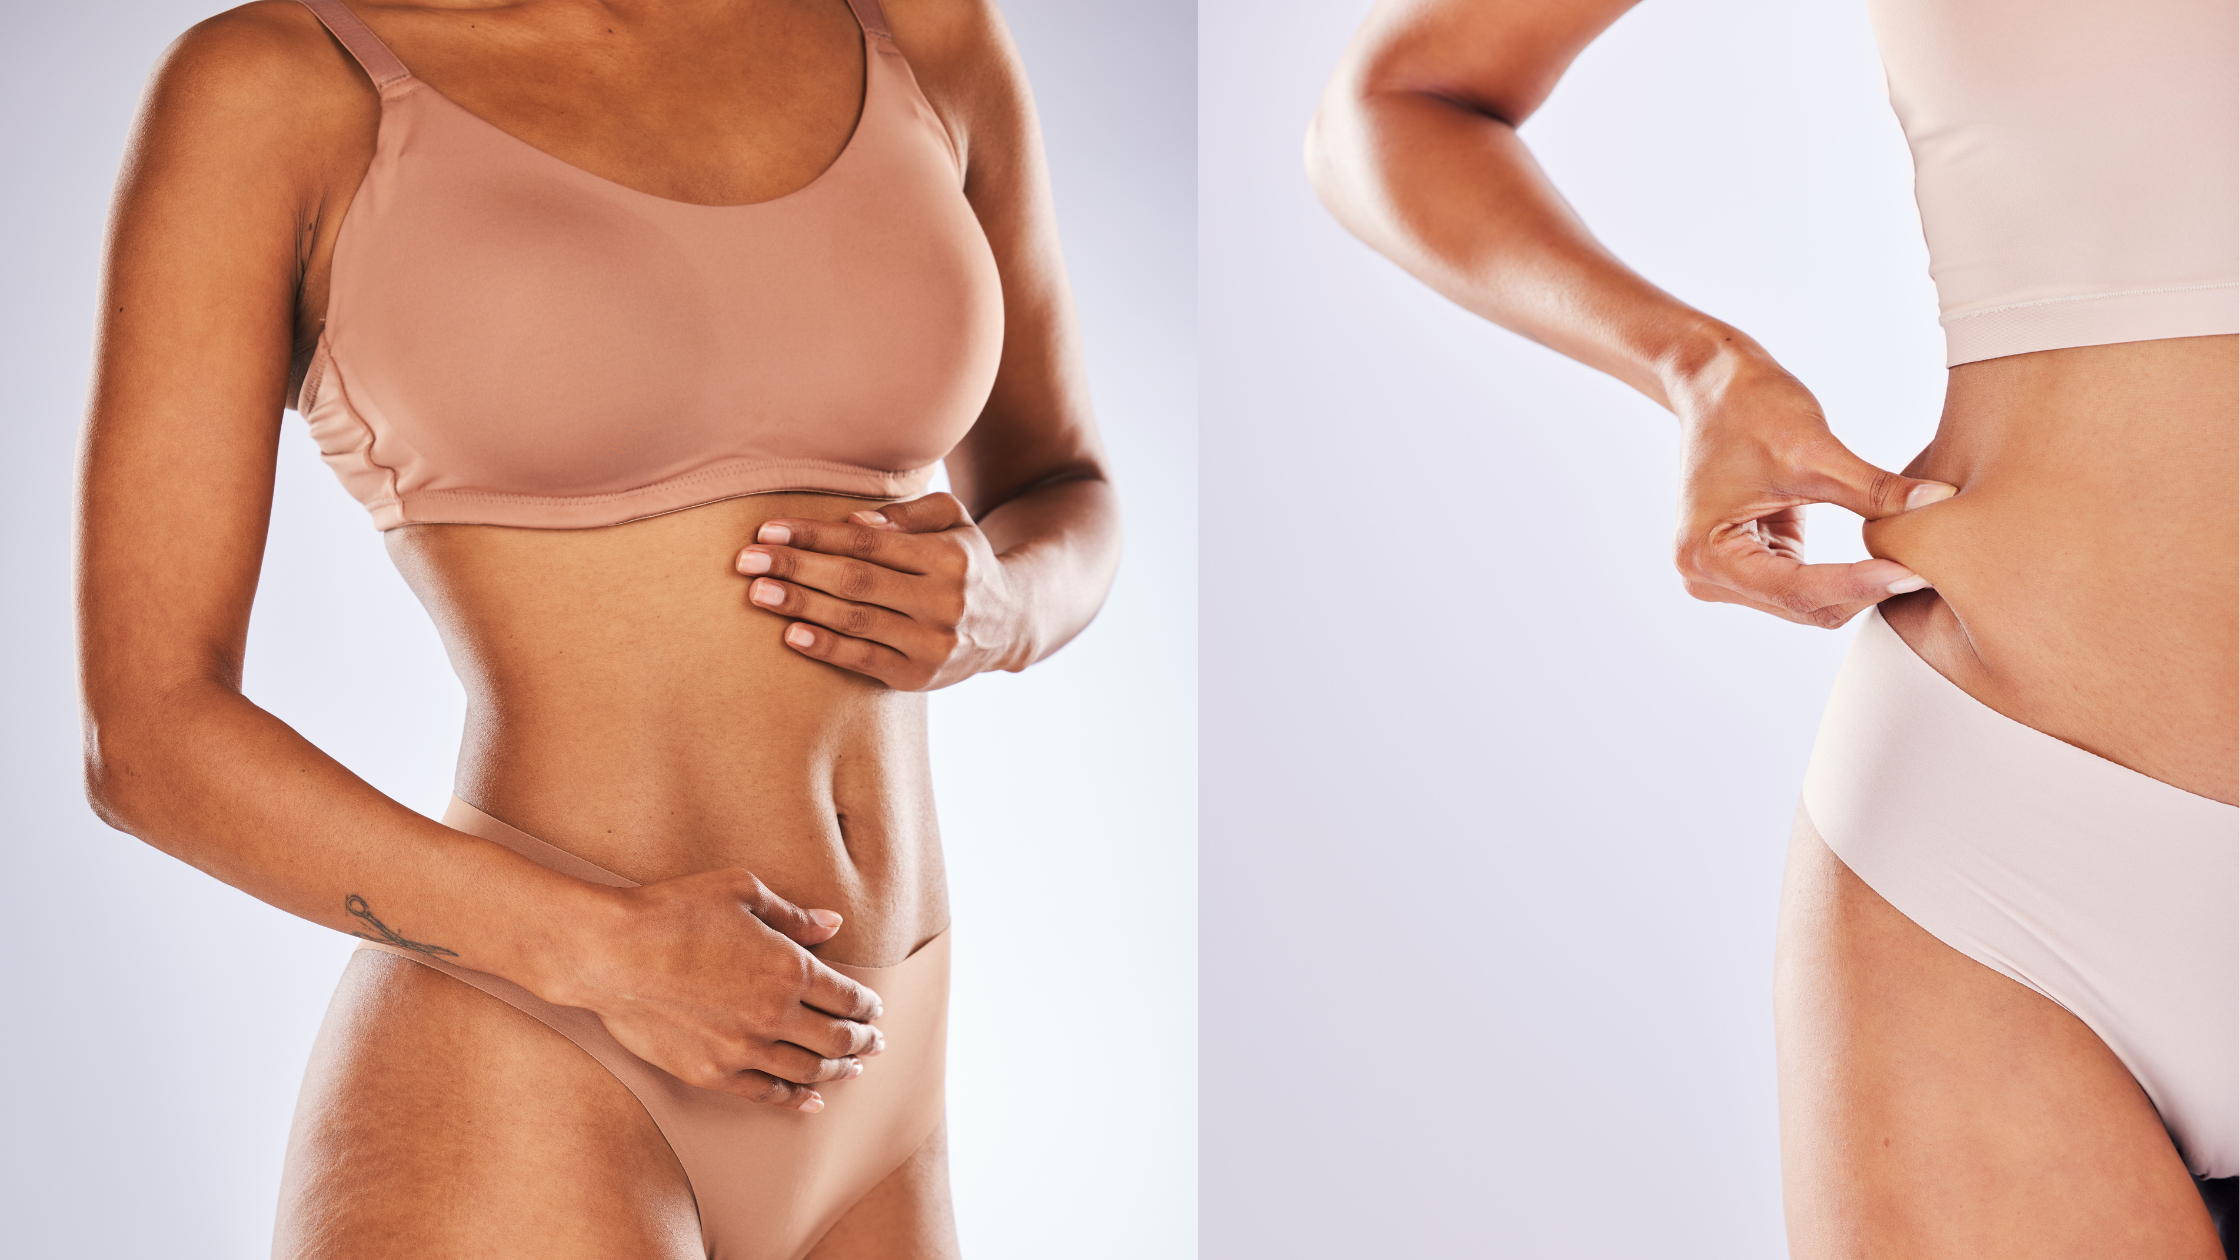 Two pictures showing a tummy tuck and liposuction potential patients.